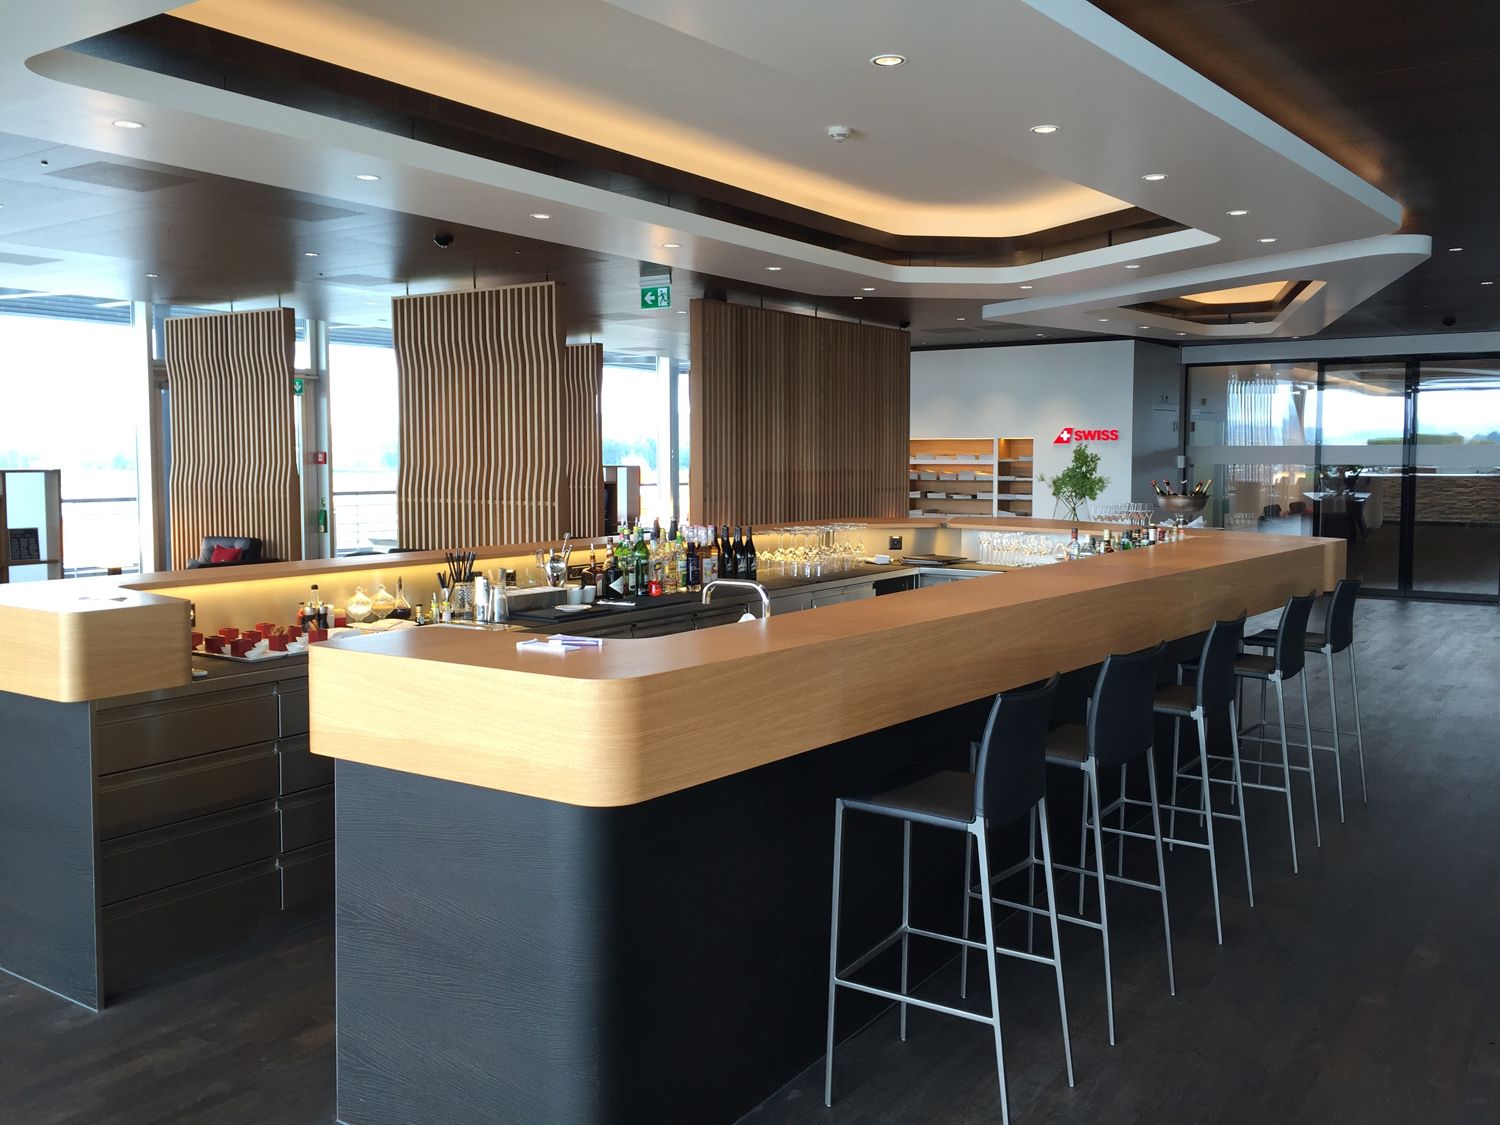 Gallery: Swiss' first class lounge at Zurich Airport